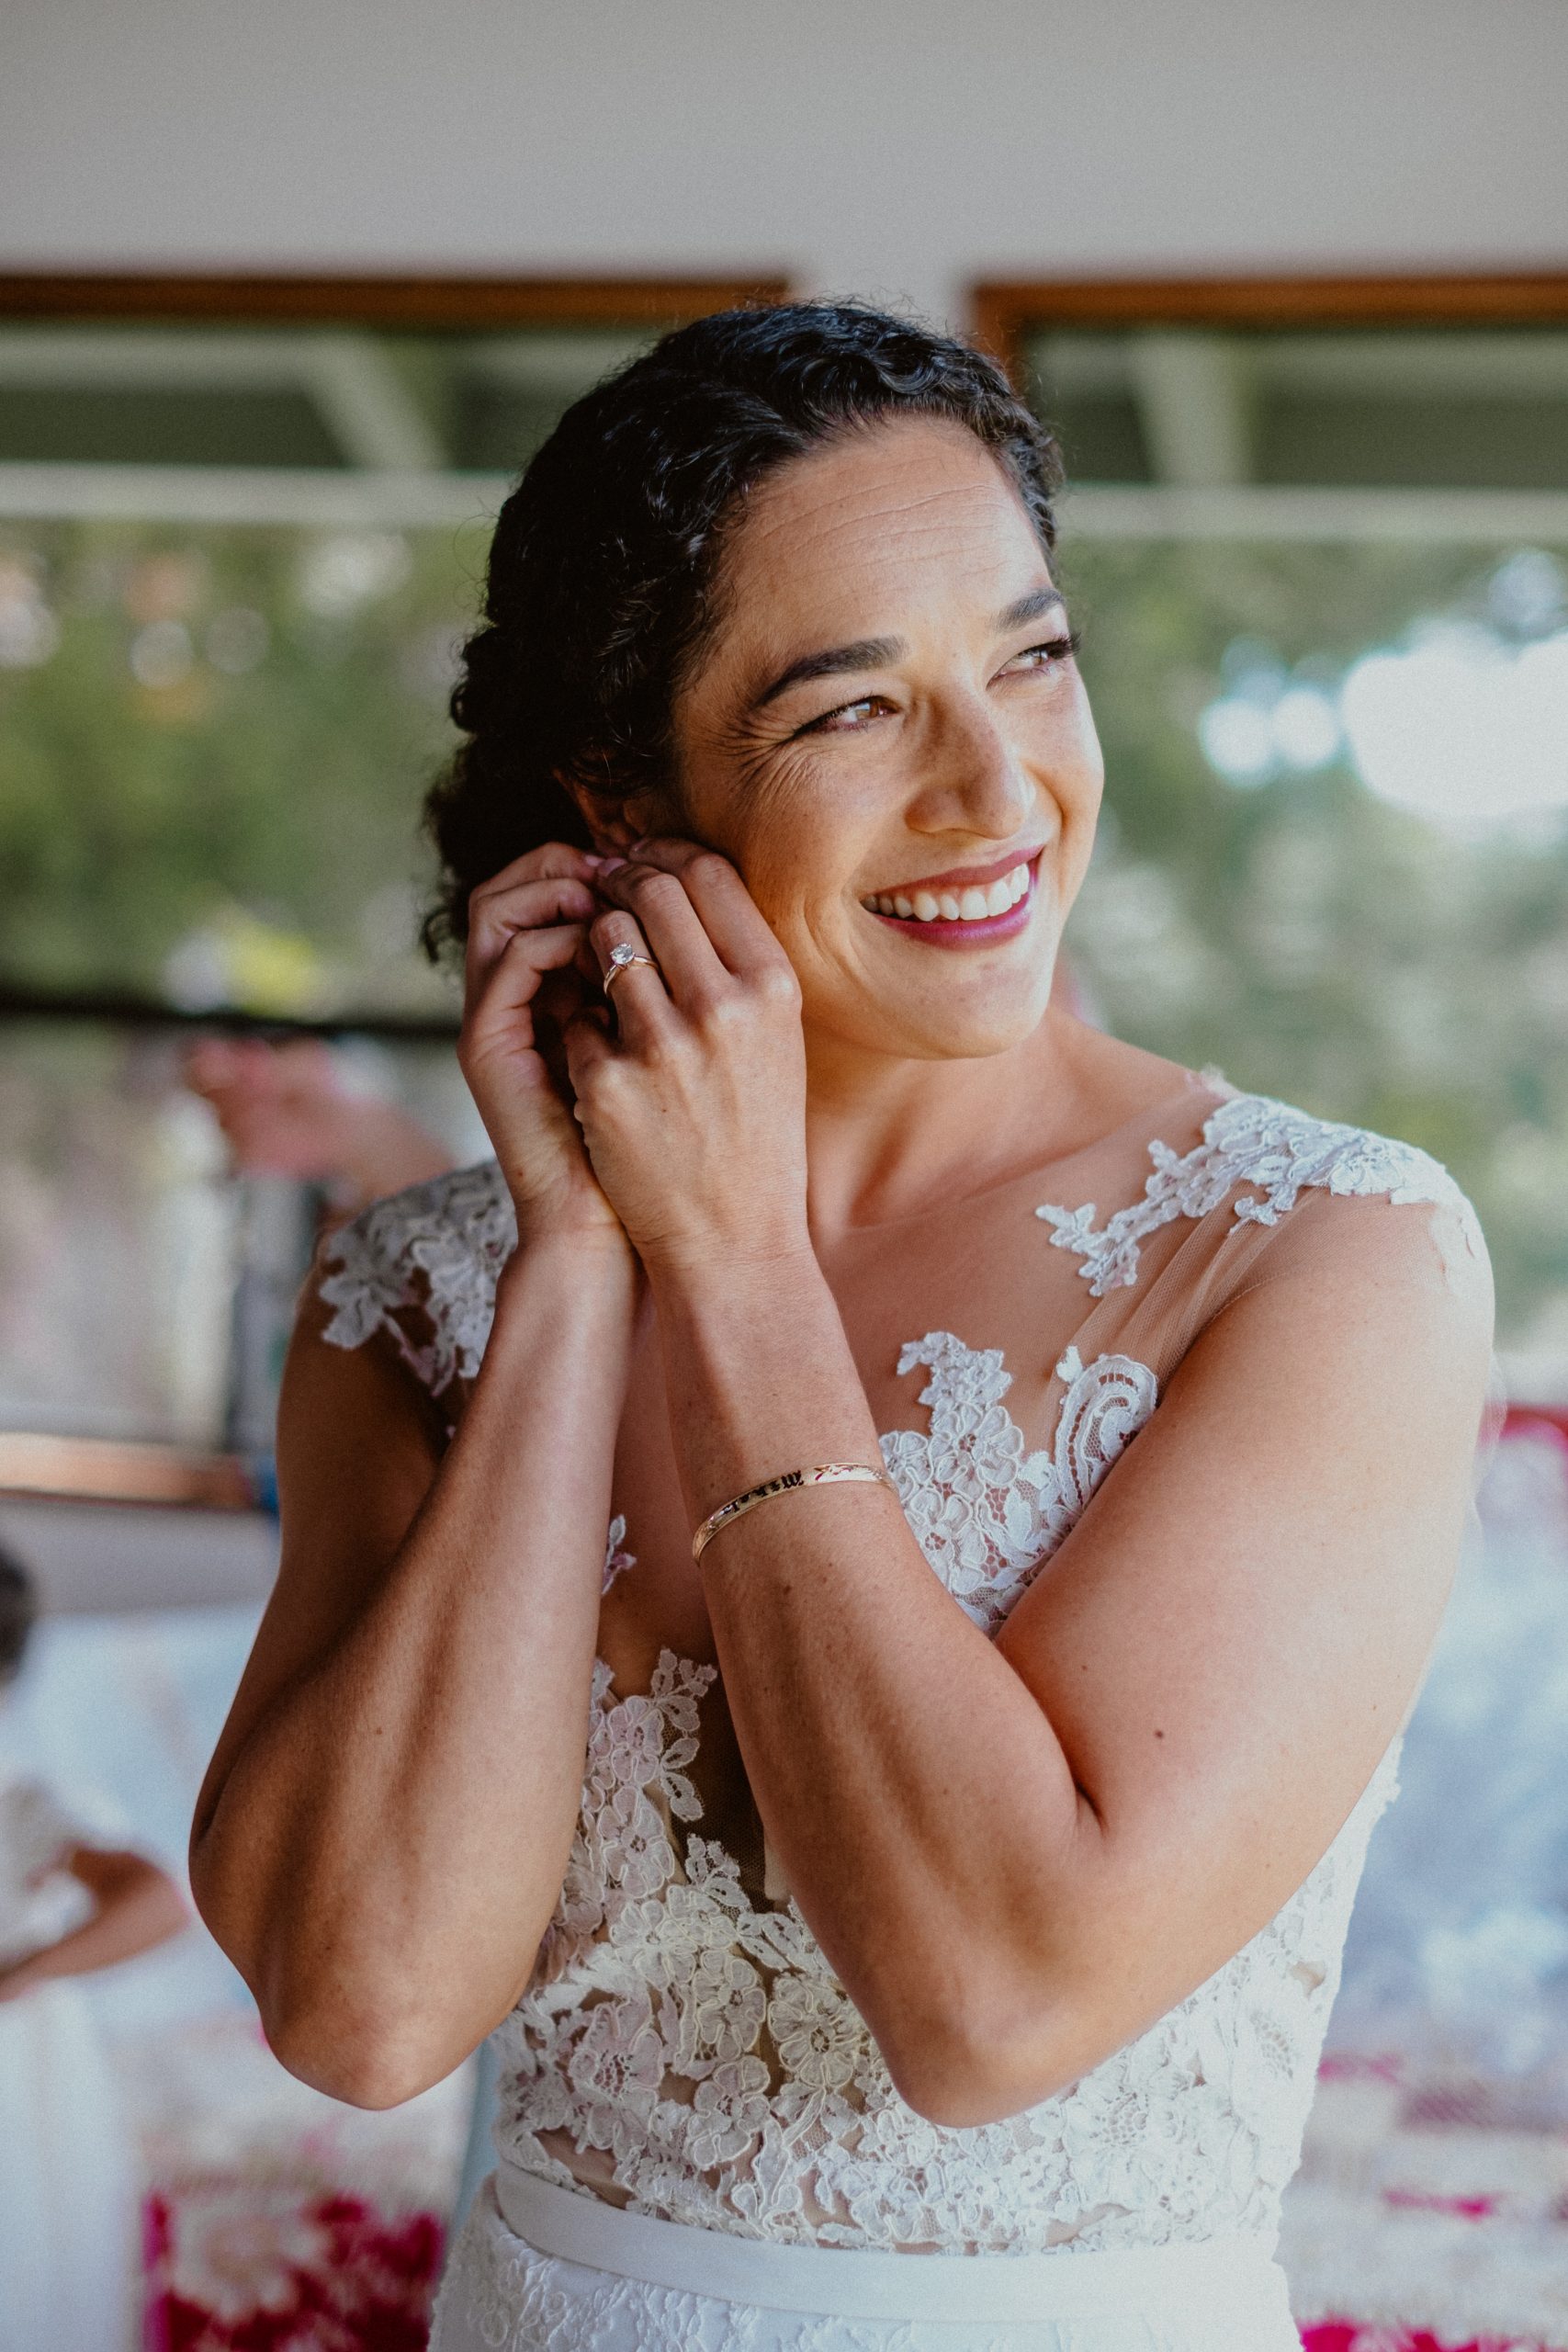 Bride getting ready before Fall Hawaii wedding, Hawaii wedding and elopement photography inspiration